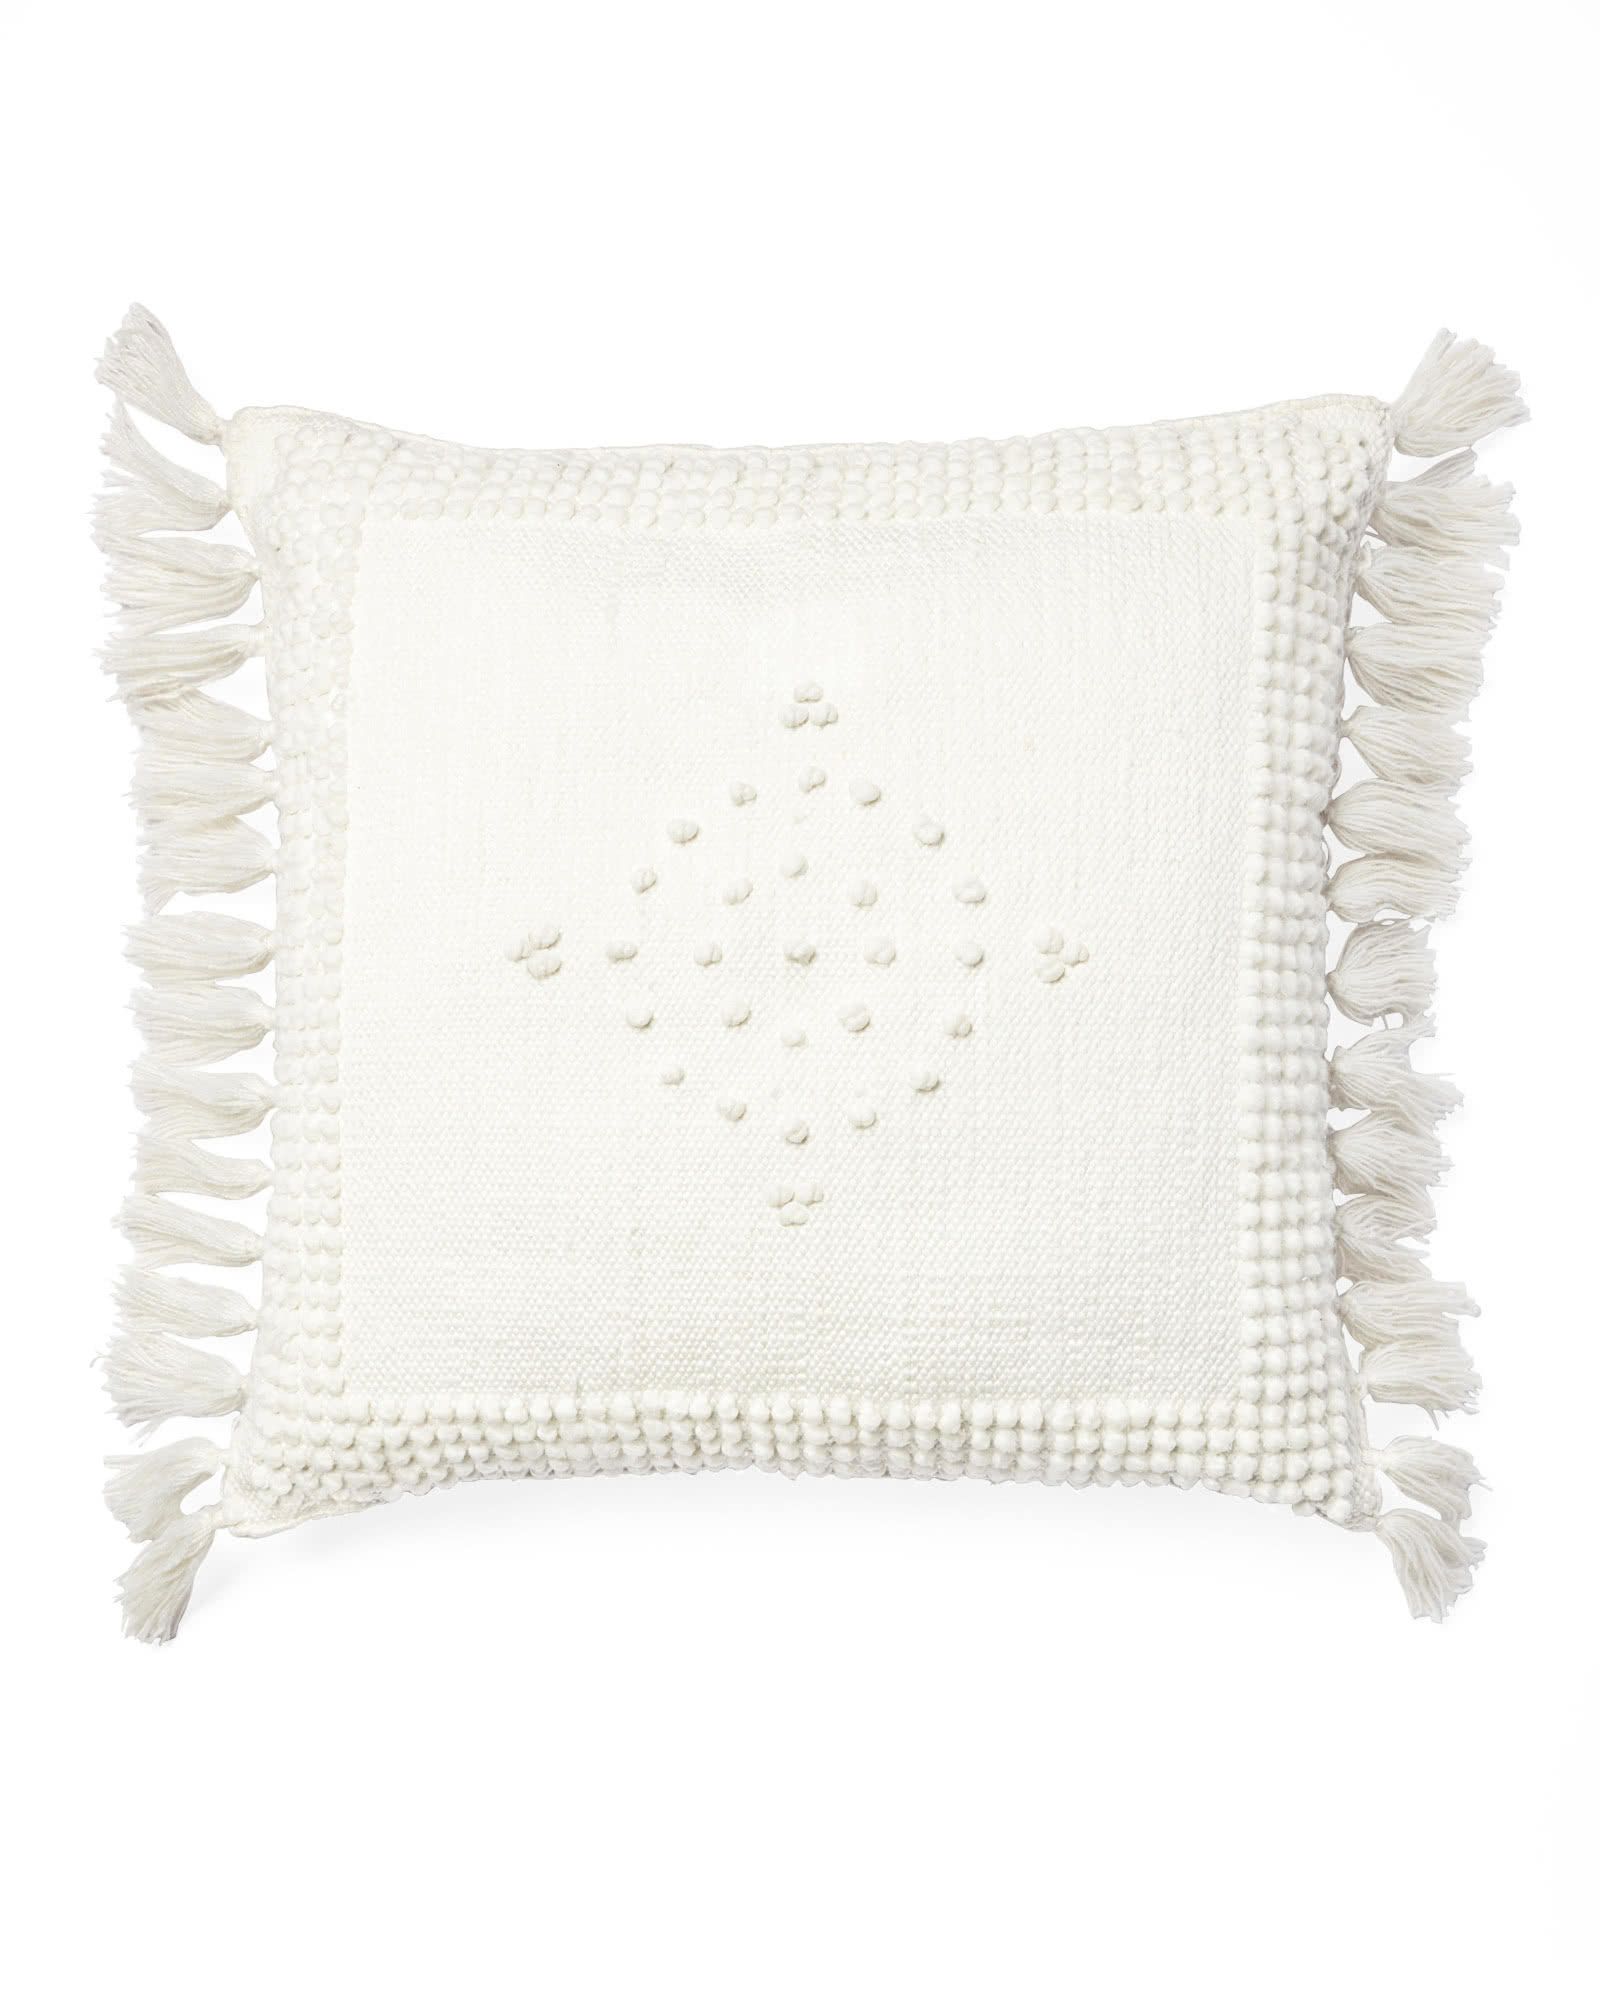 Montecito Outdoor Pillow Cover | Serena and Lily